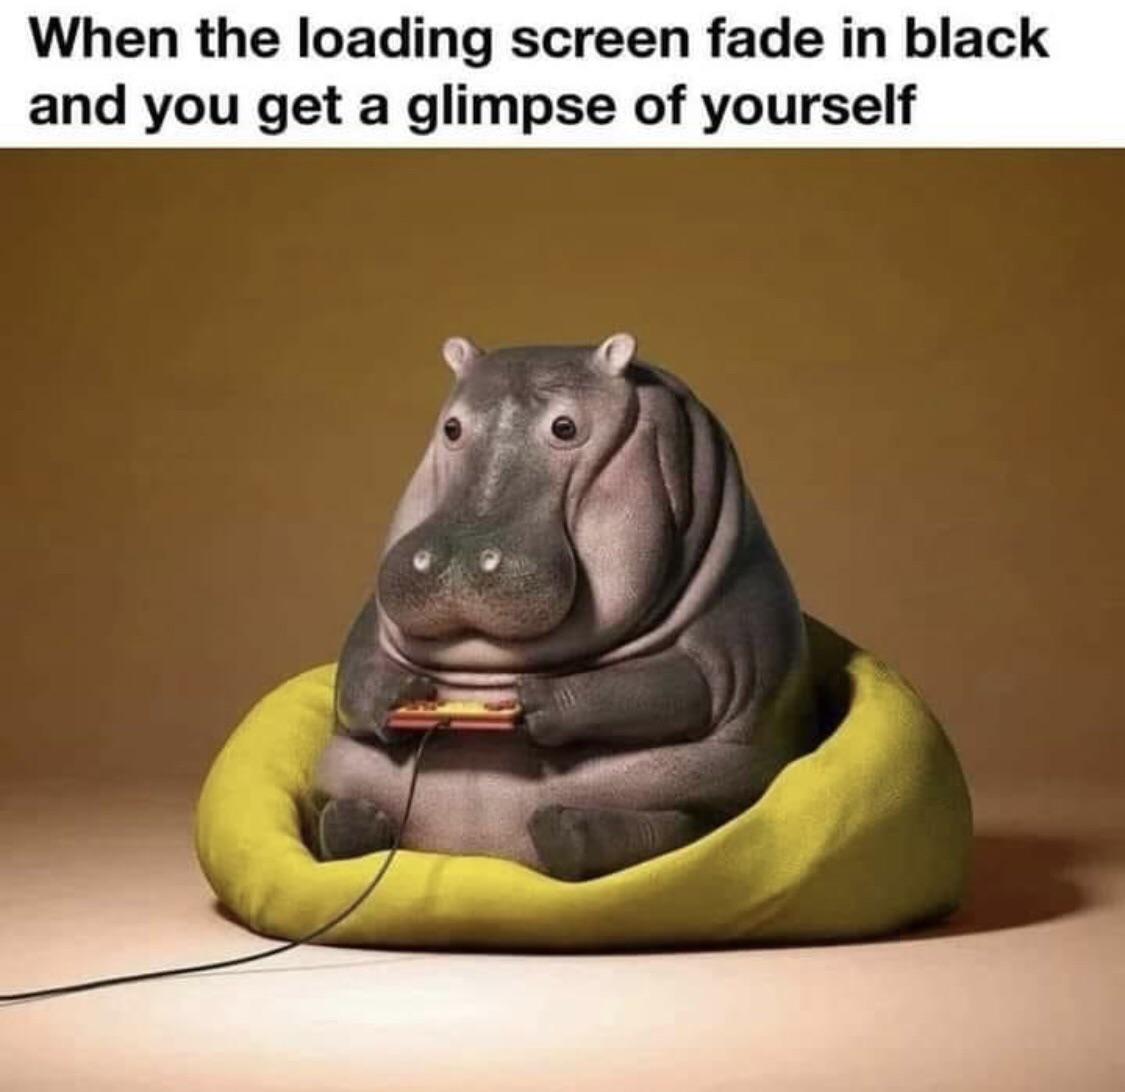 daily dose of pics and memes - hippo sitting on couch - When the loading screen fade in black and you get a glimpse of yourself